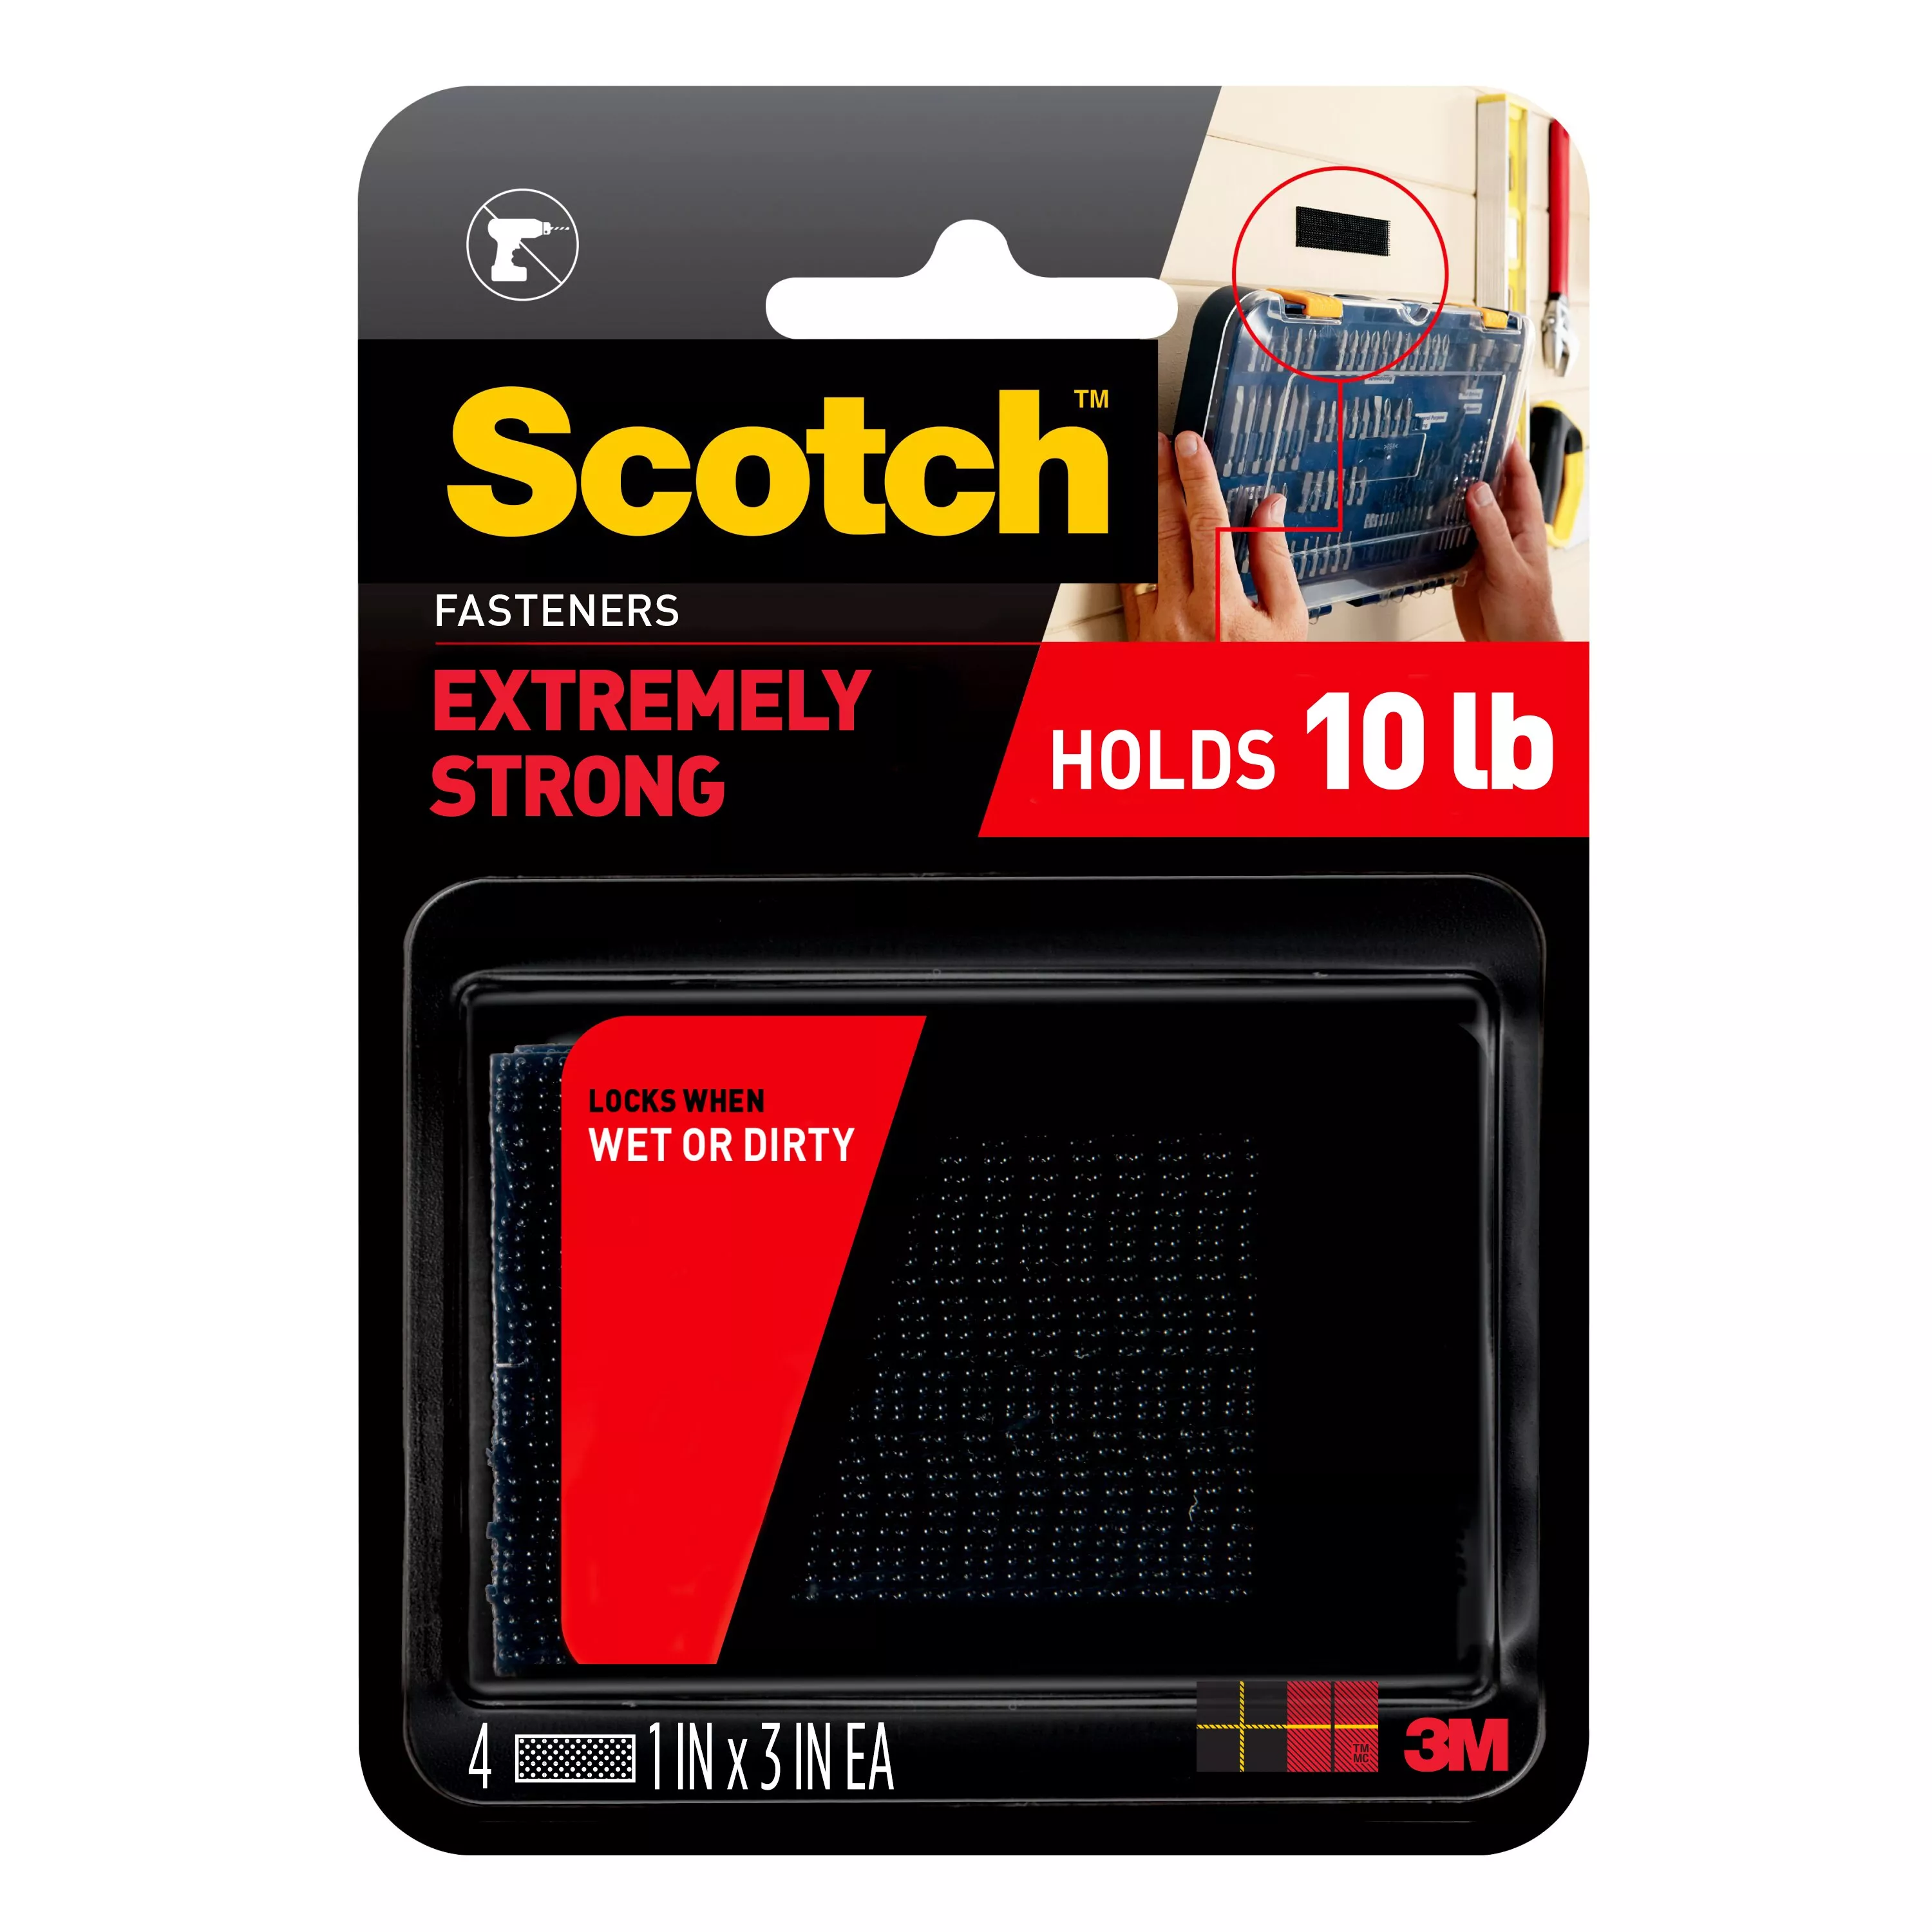 Scotch™ Extreme Fasteners RF6731, 1 in x 3 in (25,4 mm x 76,2 mm), 2
Sets of Strips, Black